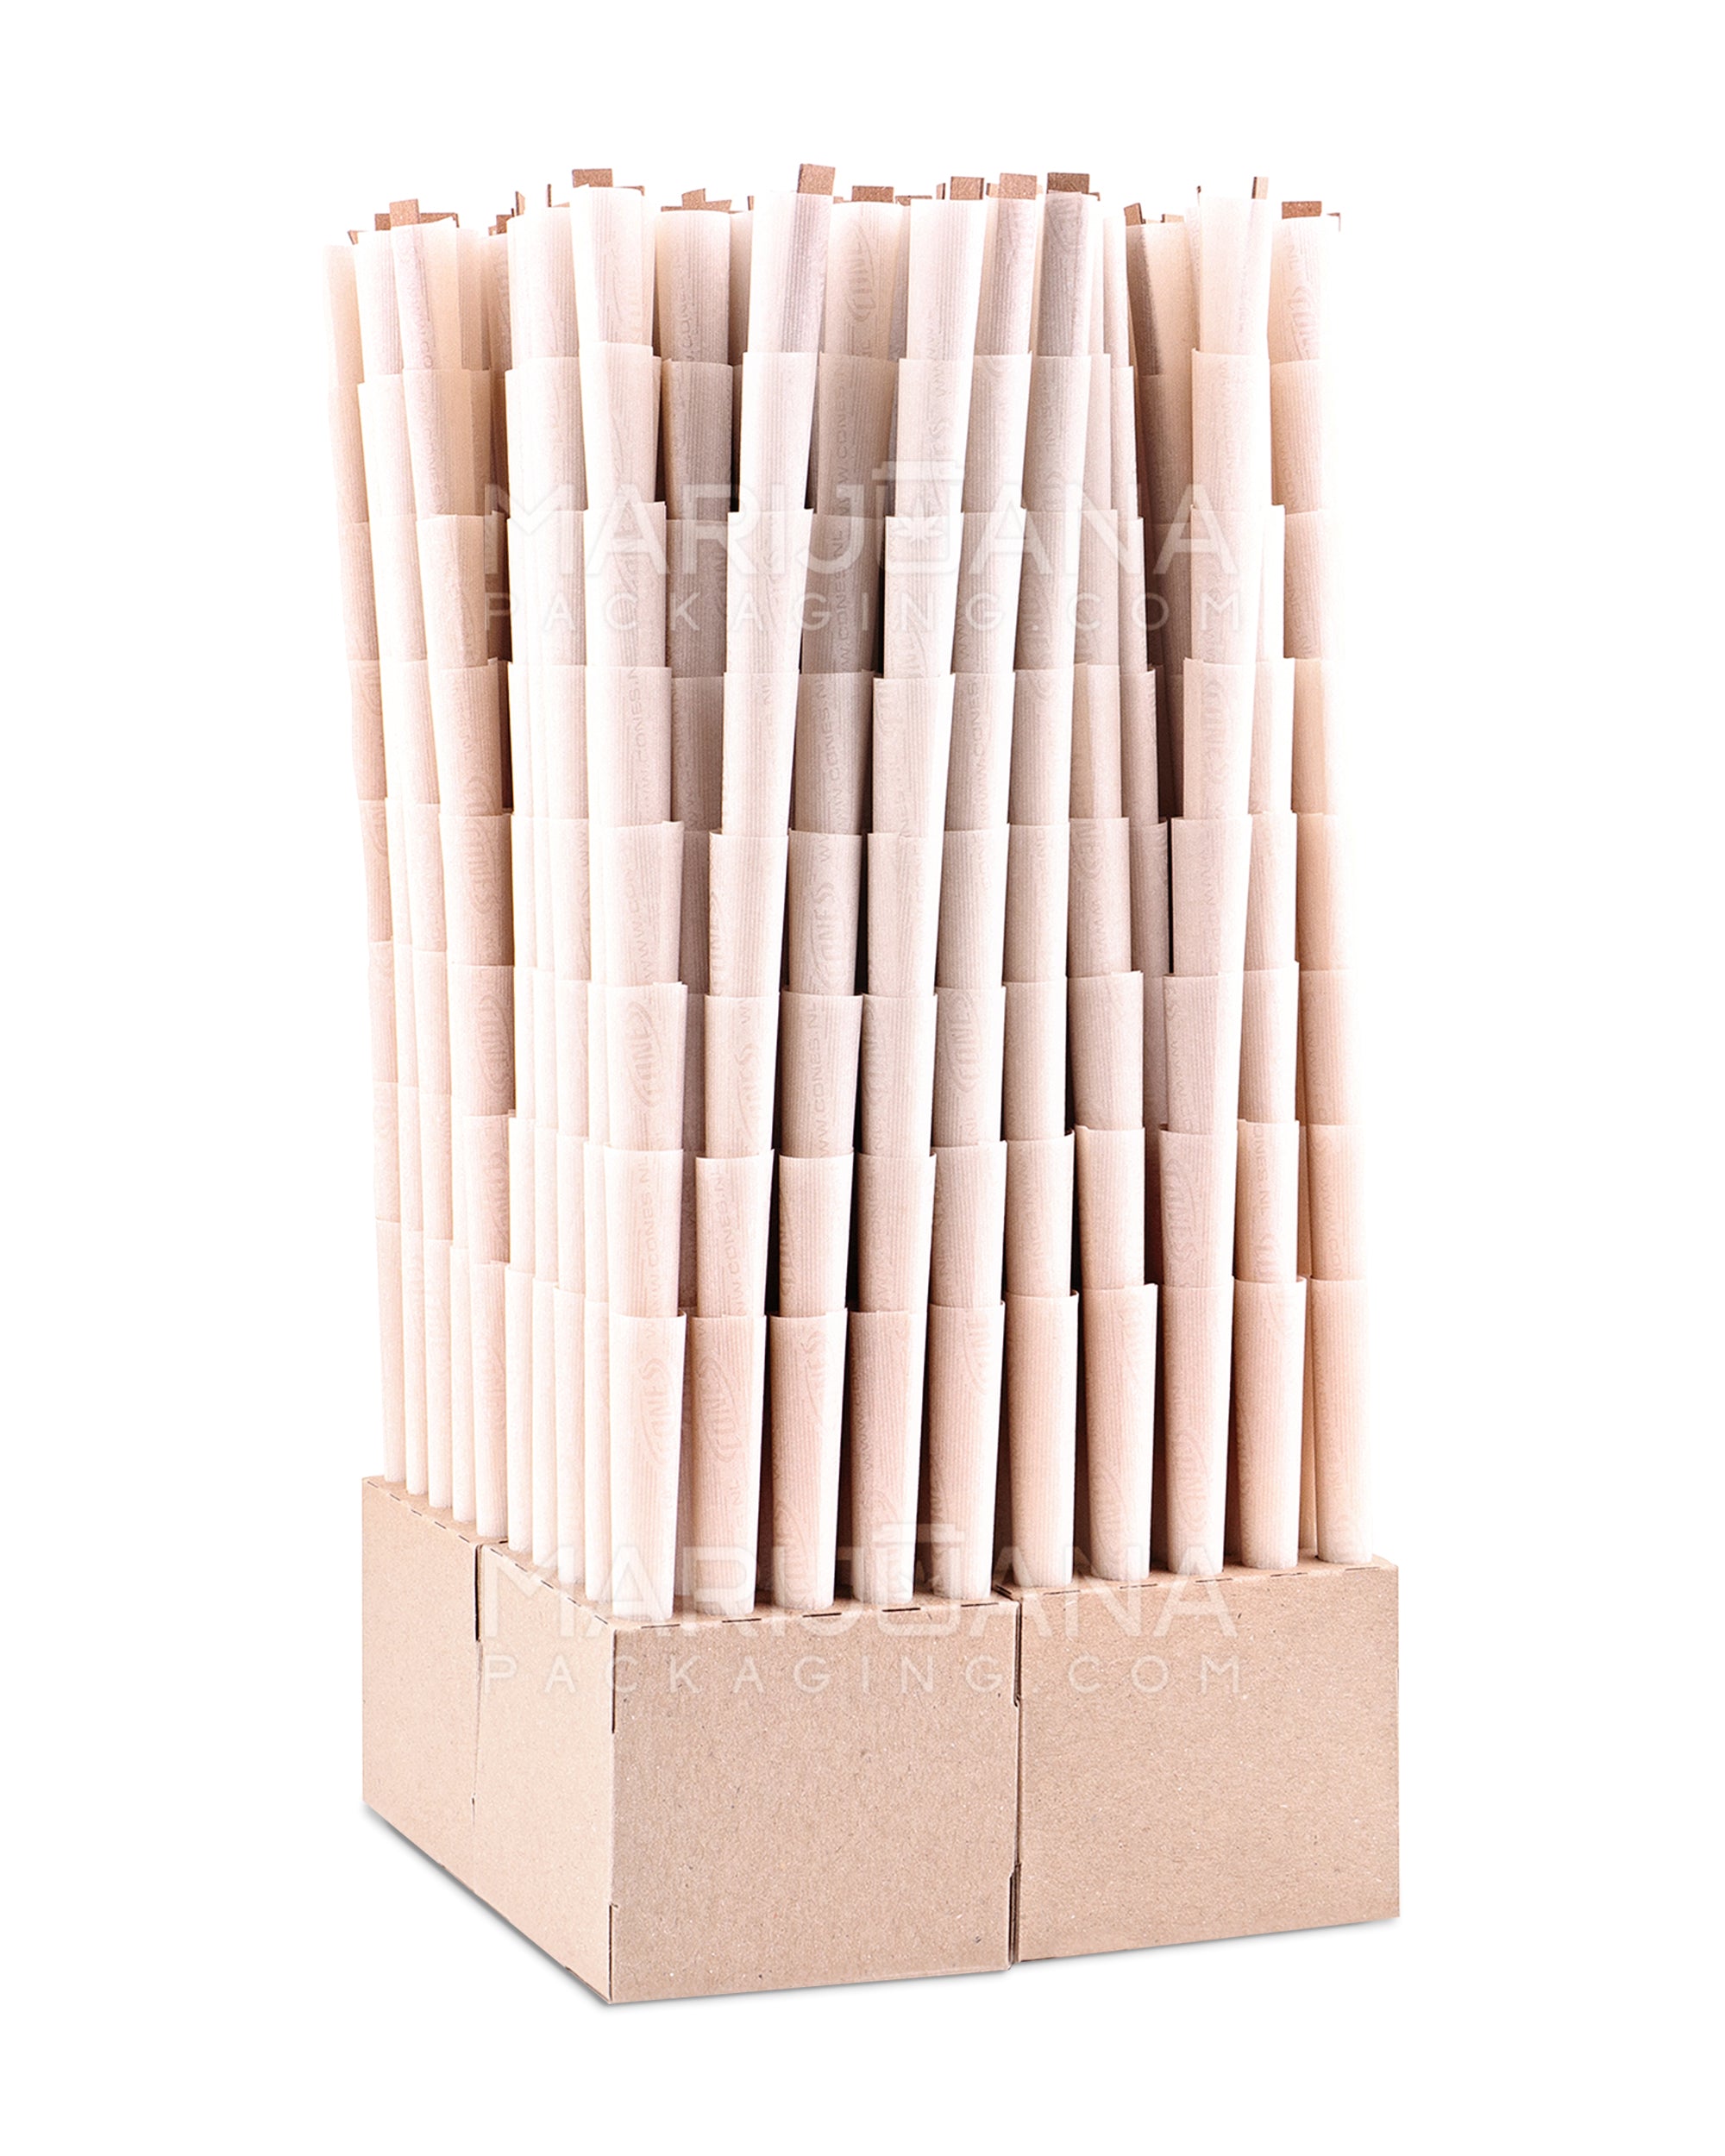 CONES | King Size Paper Pre Rolled Cones | 109mm - Organic Hemp Paper - 800 Count